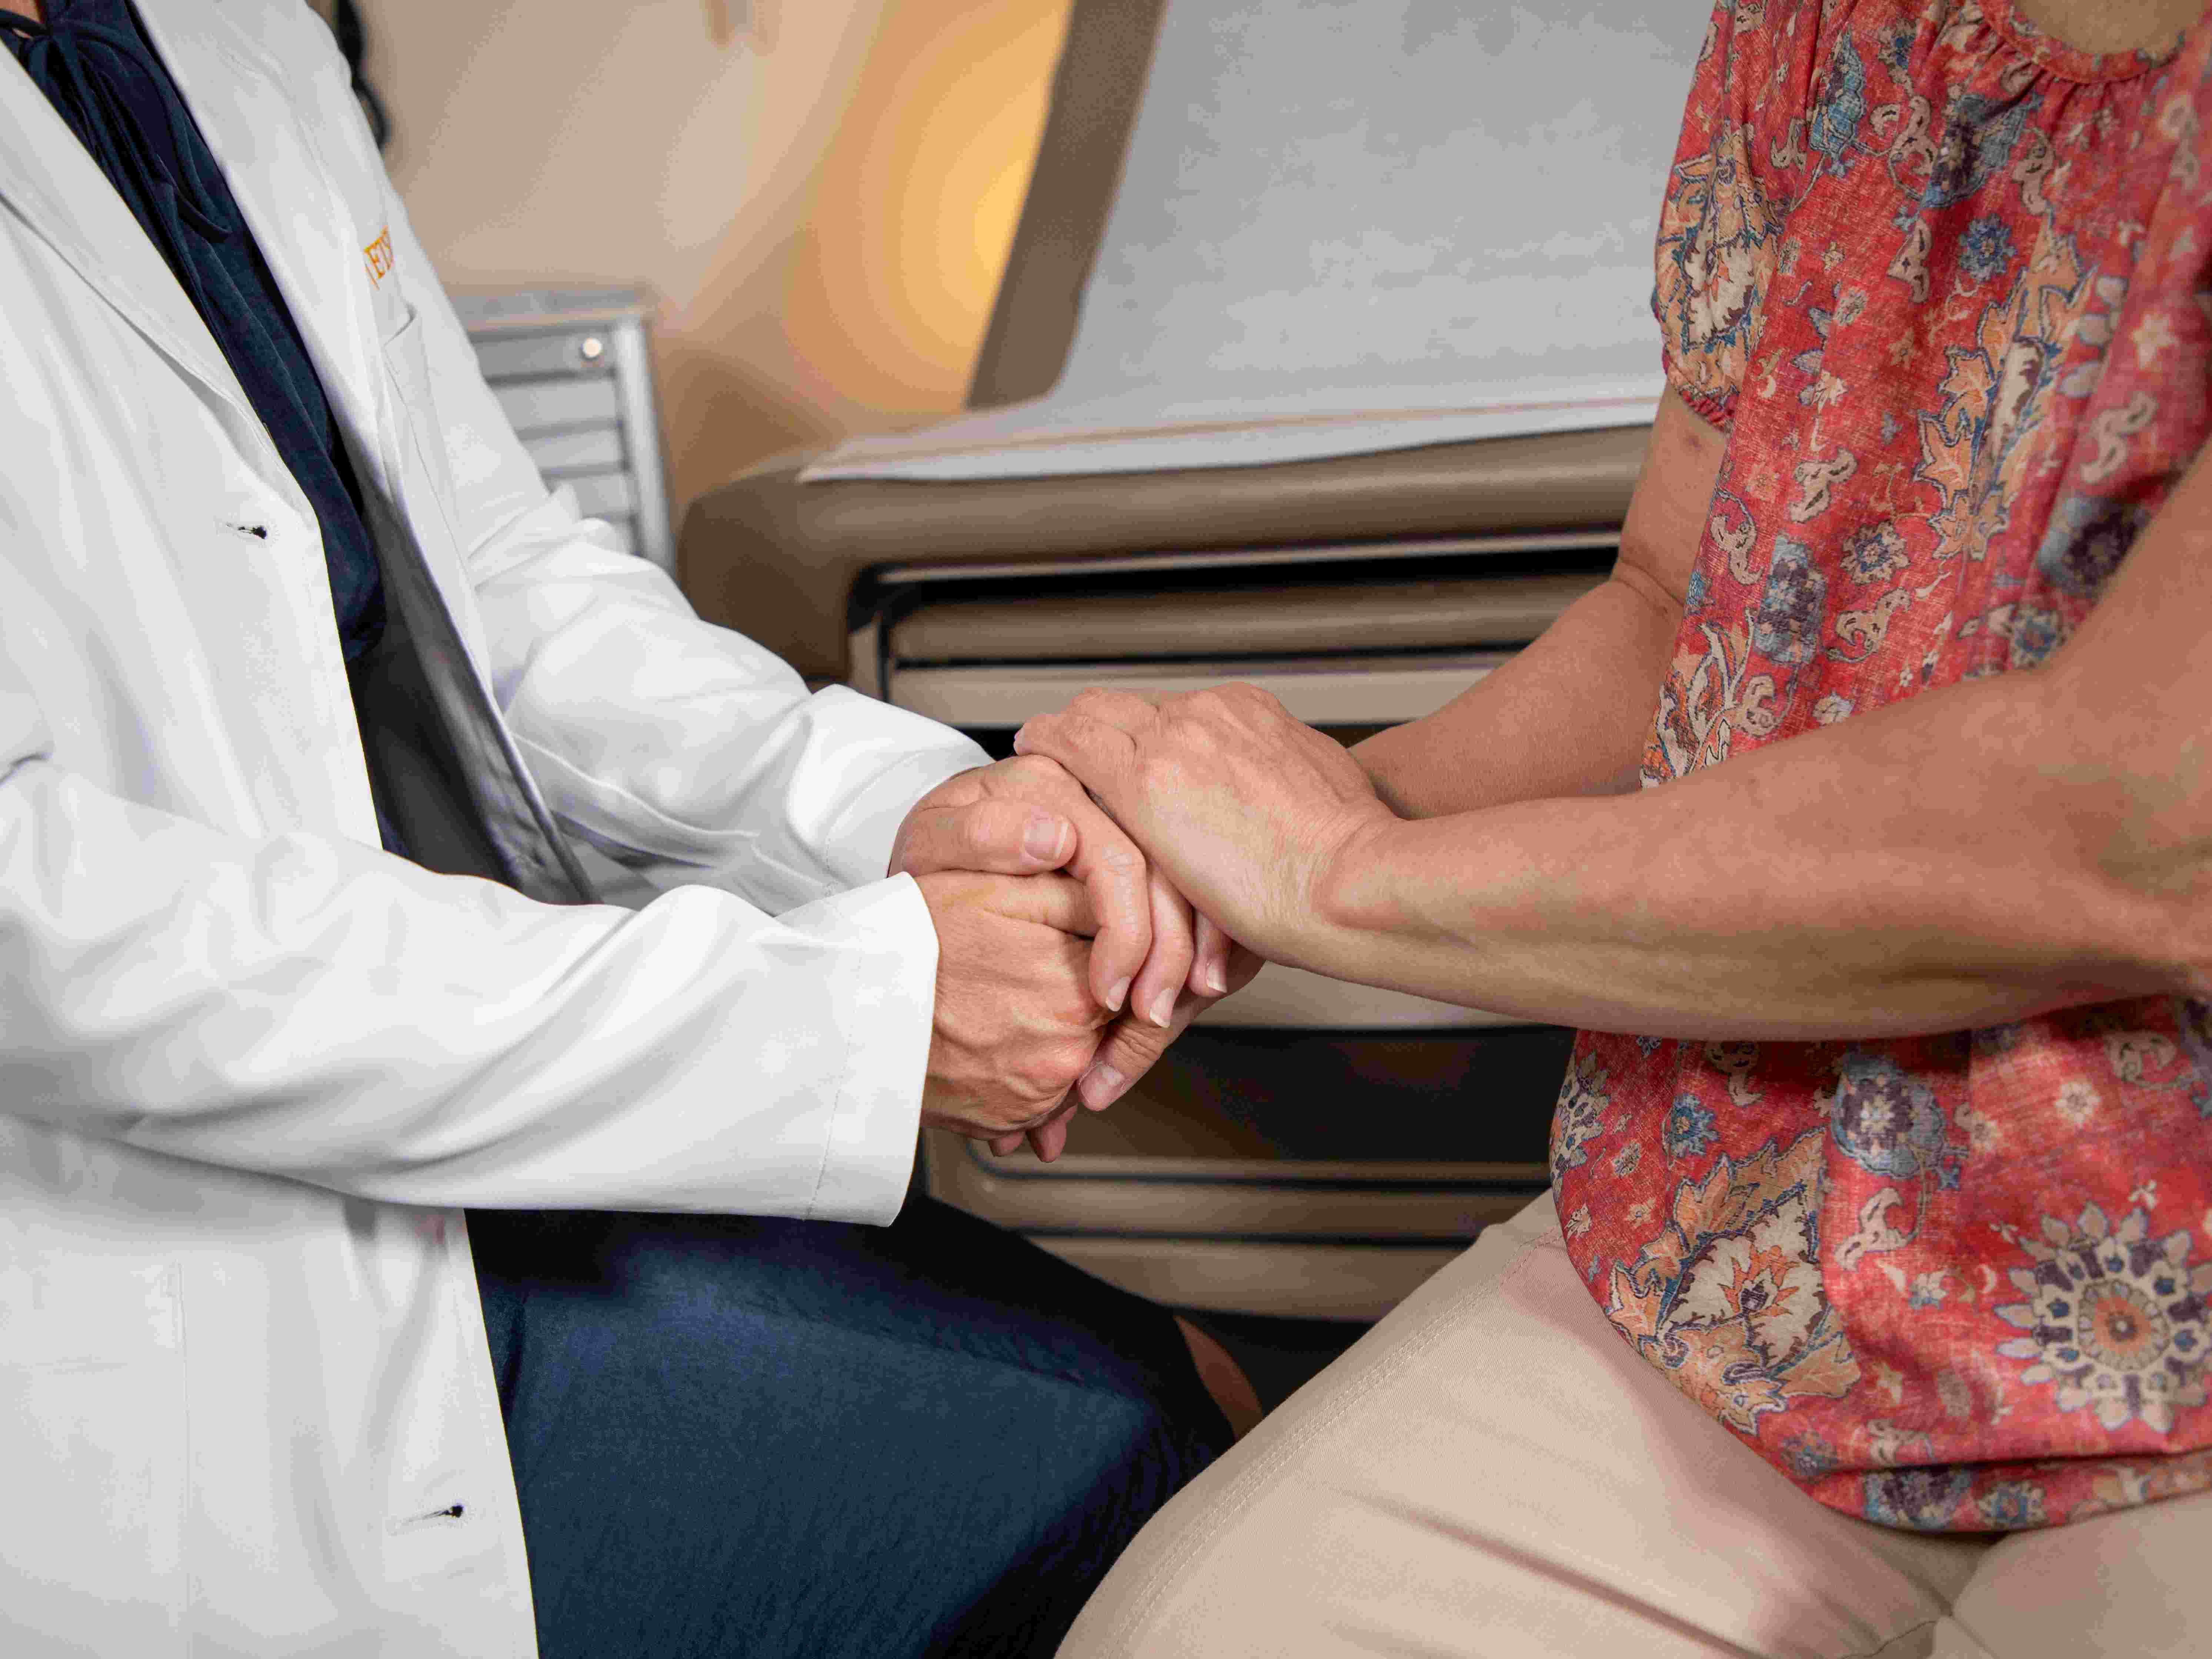  doctor holding patients hands in comforting manner.